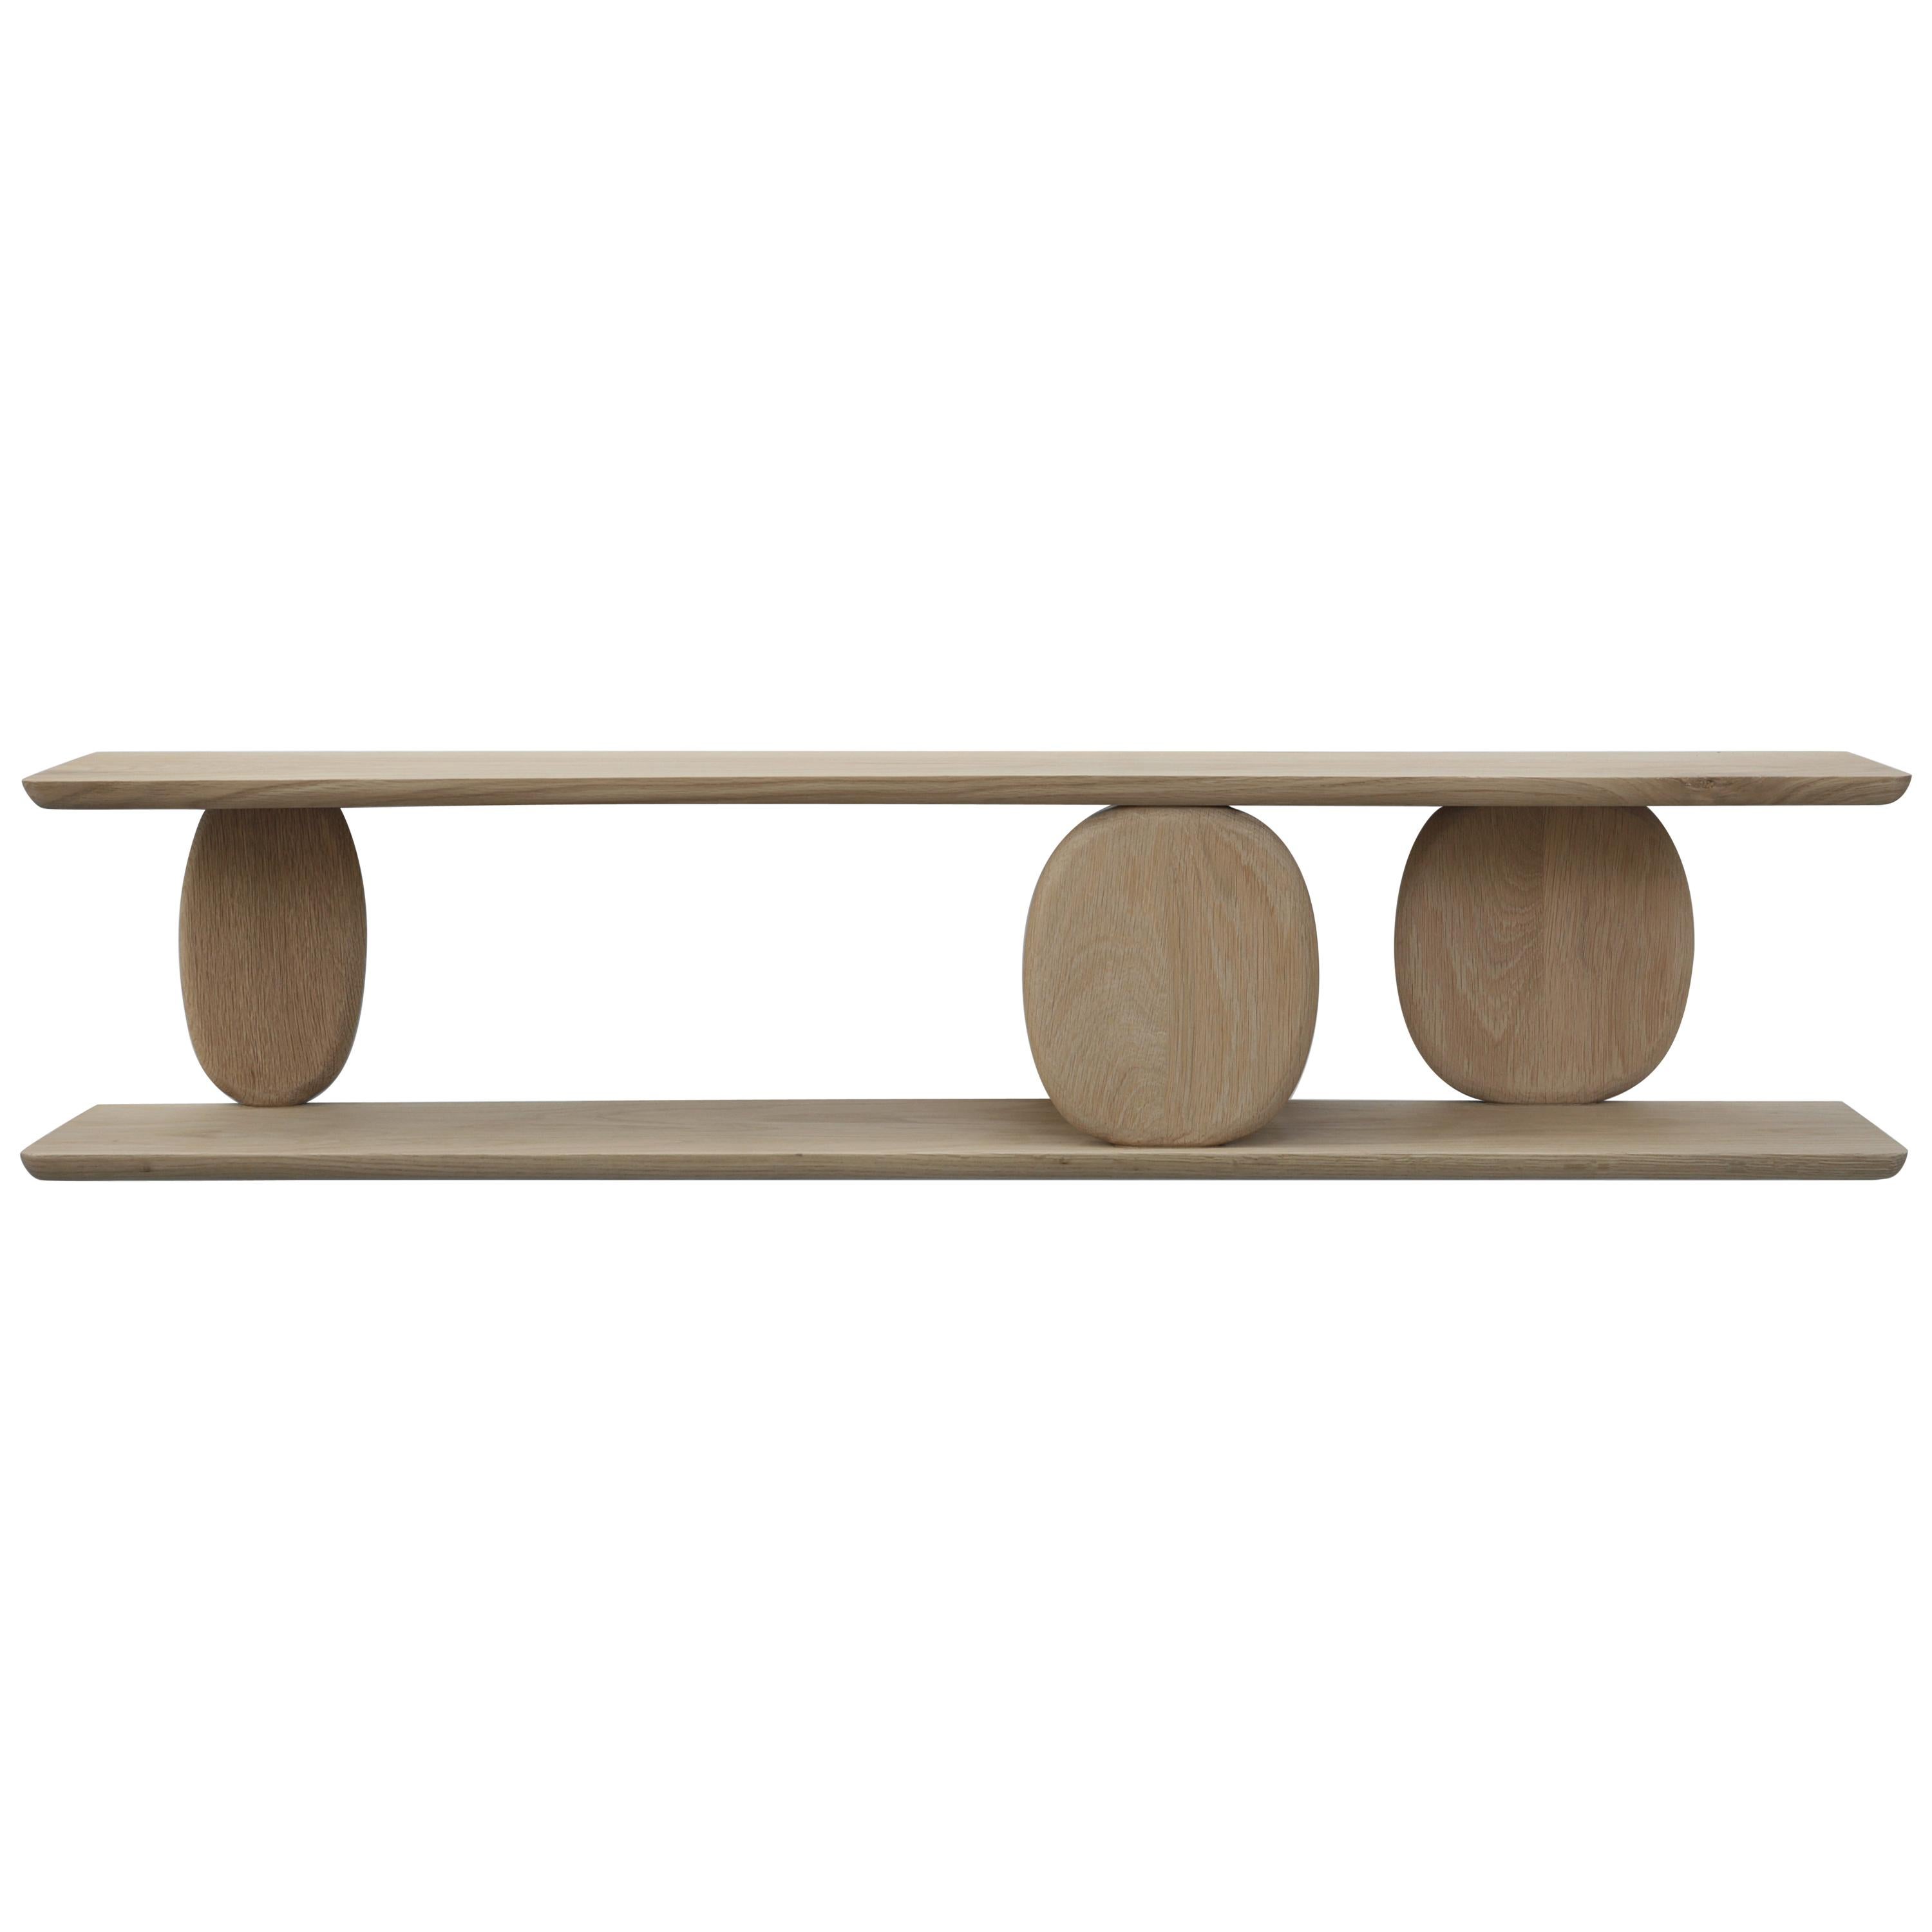 Noviembre XVIII Wall Shelf in Oak Wood, Floating Shelf by Joel Escalona

The Noviembre collection is inspired by the creative values of Constantin Brancusi, a Romanian sculptor considered one of the most influential artists of the twentieth century,